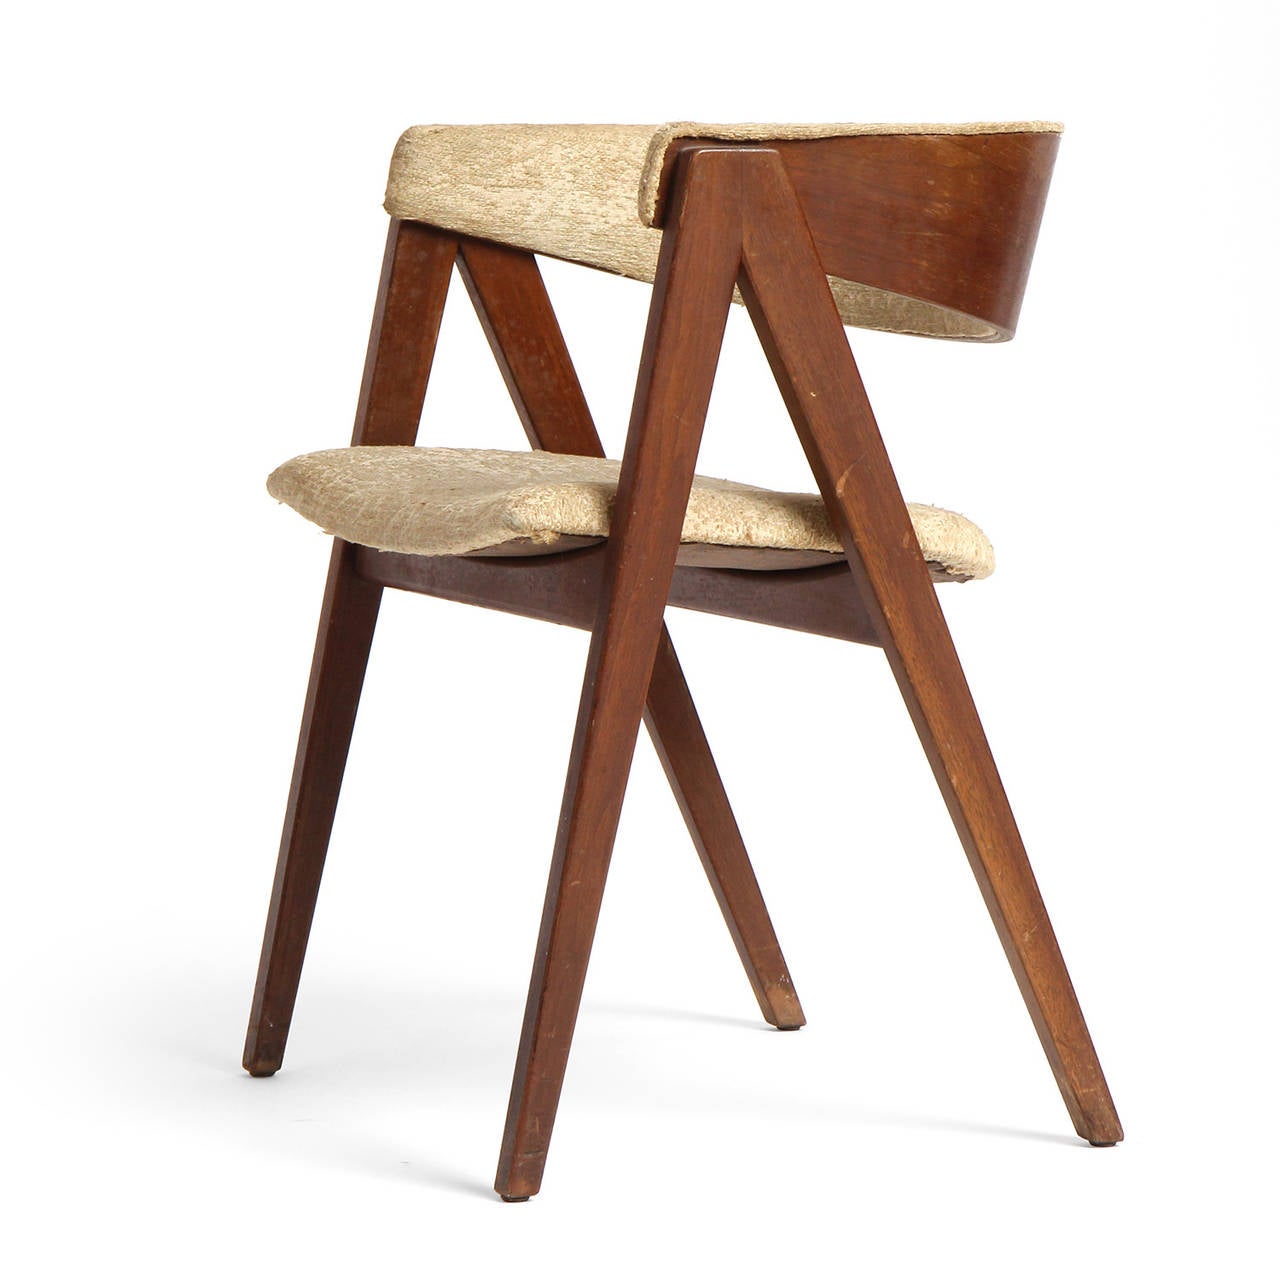 Chair by Allan Gould In Good Condition For Sale In Sagaponack, NY